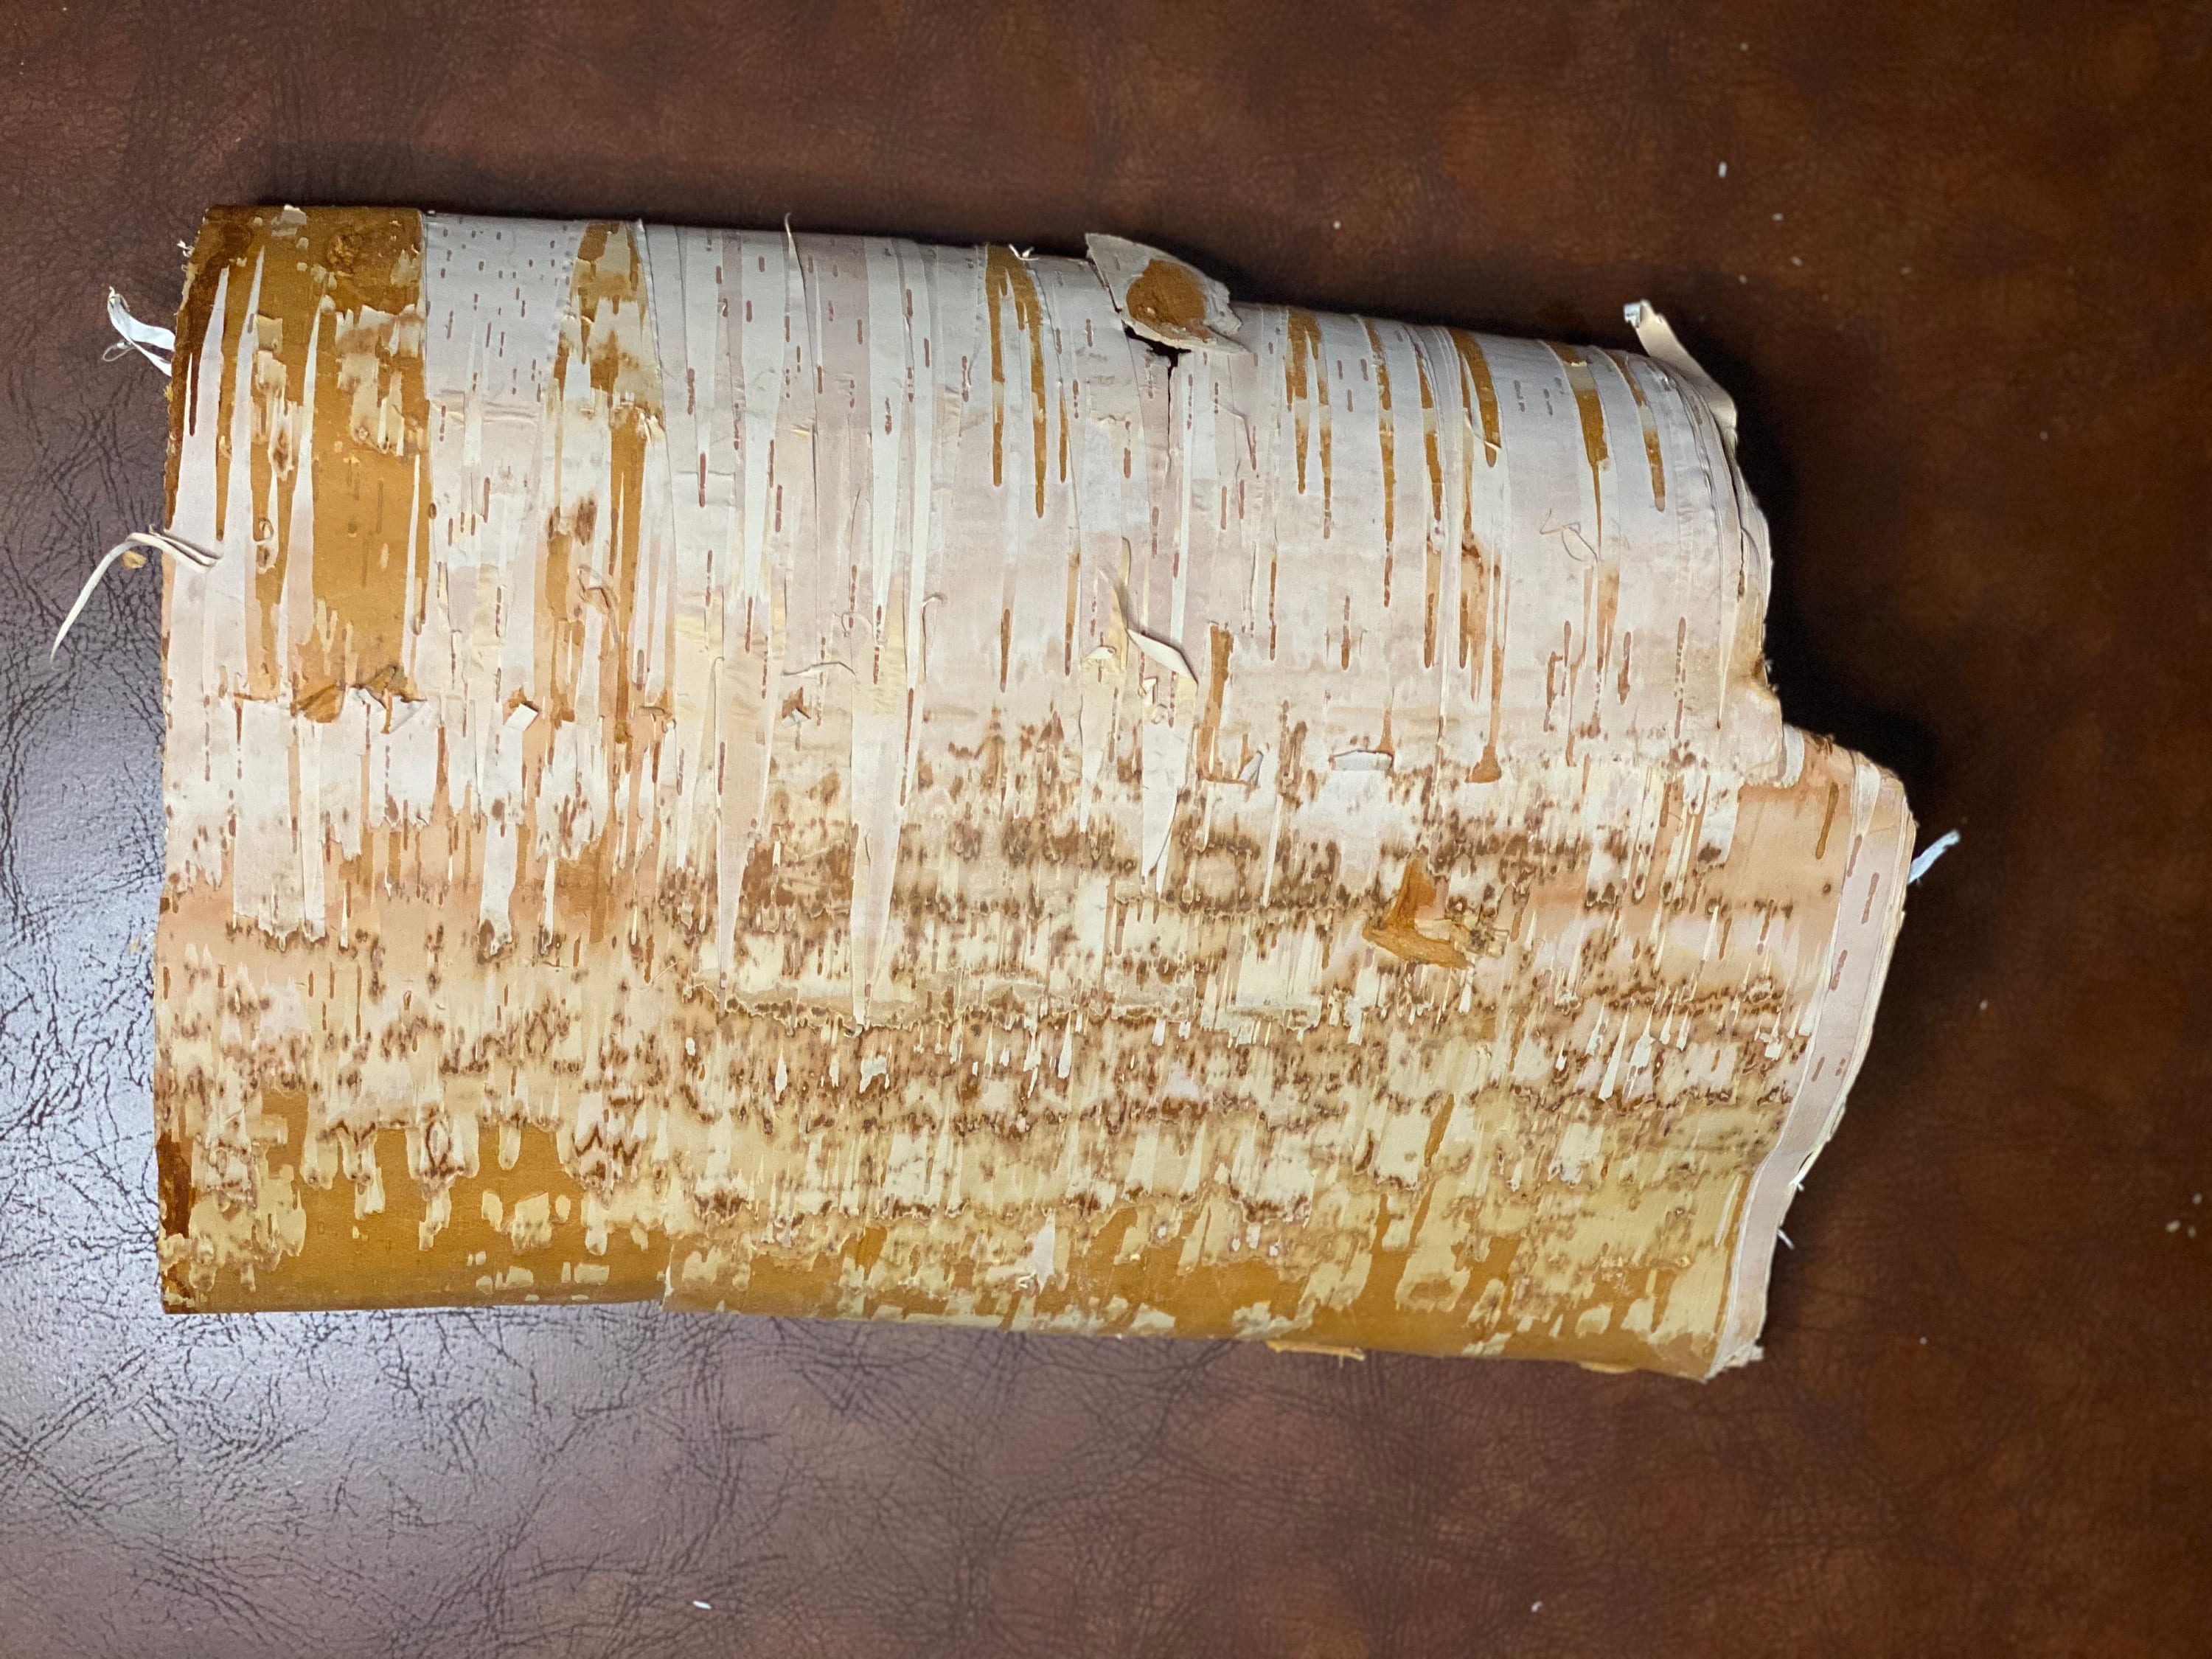 White Birch Bark, 17 Inches by 16 Inches